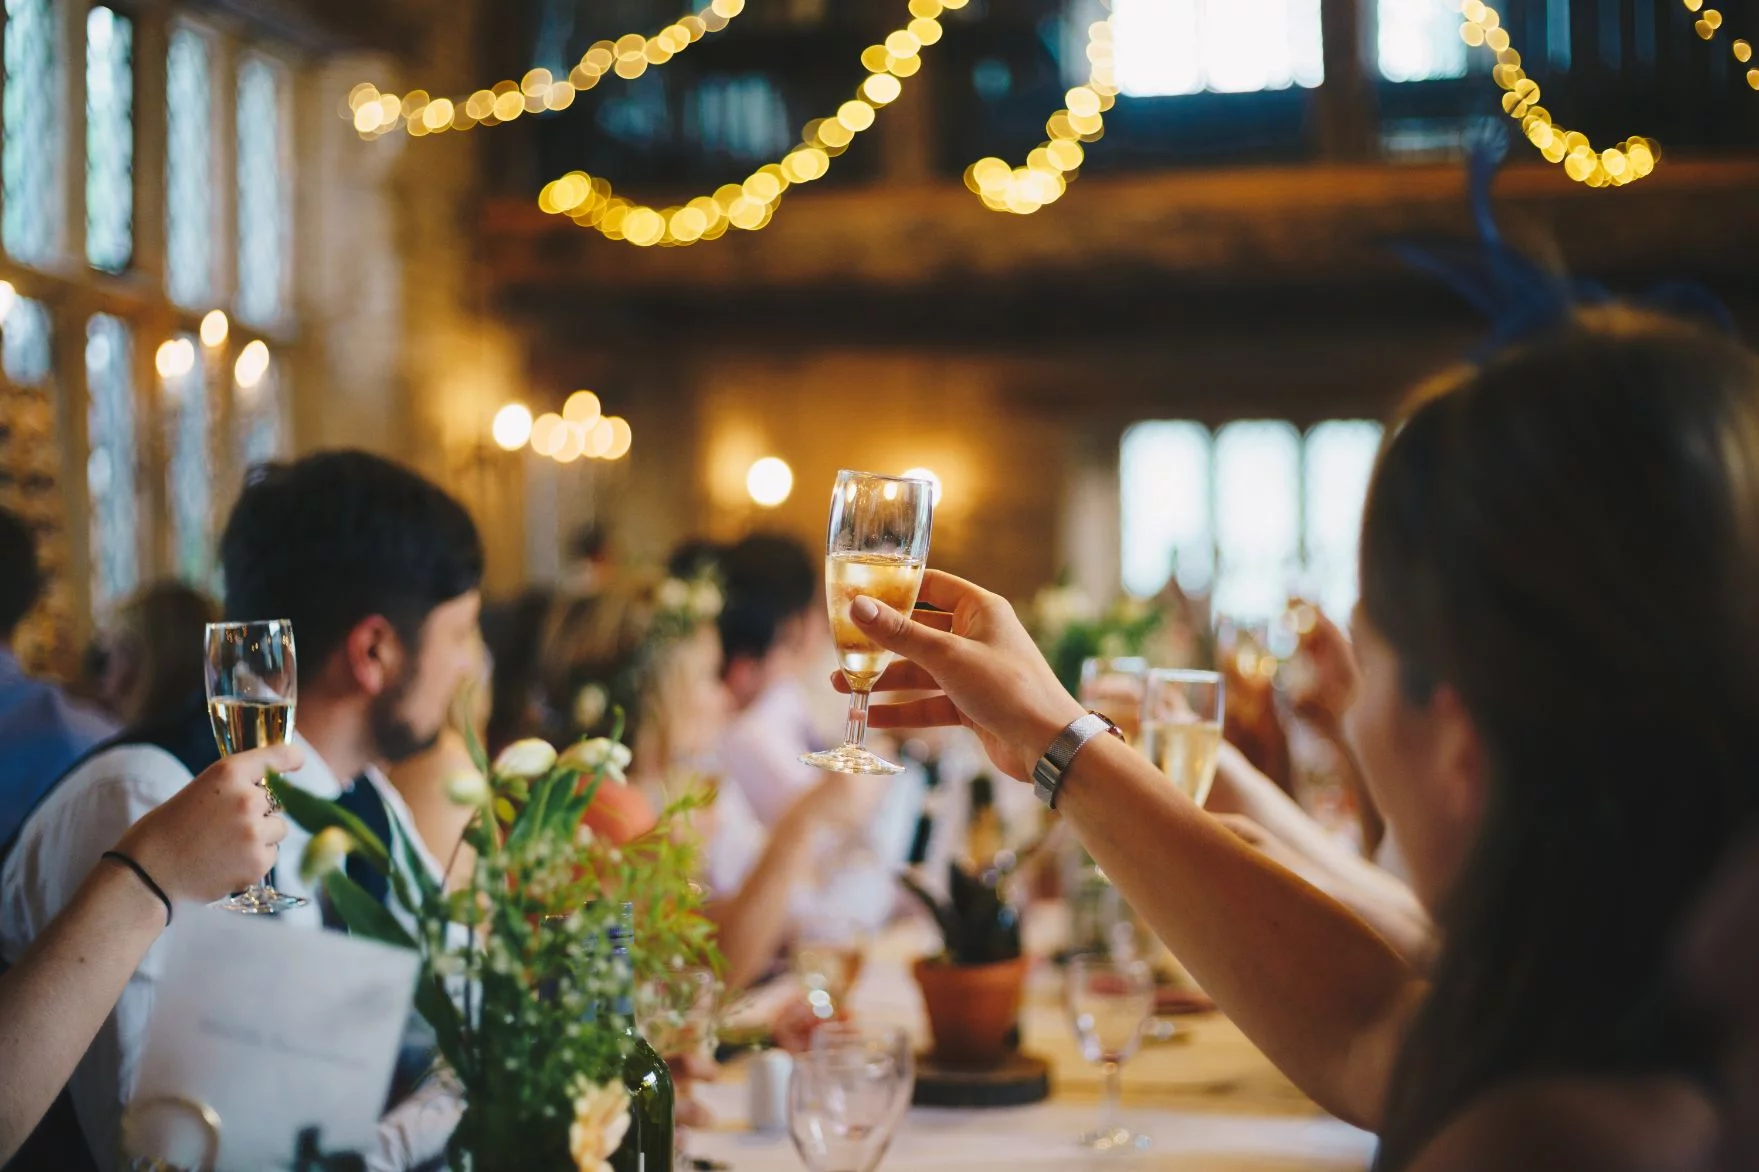 A group of people toasting champagne at a wedding reception.